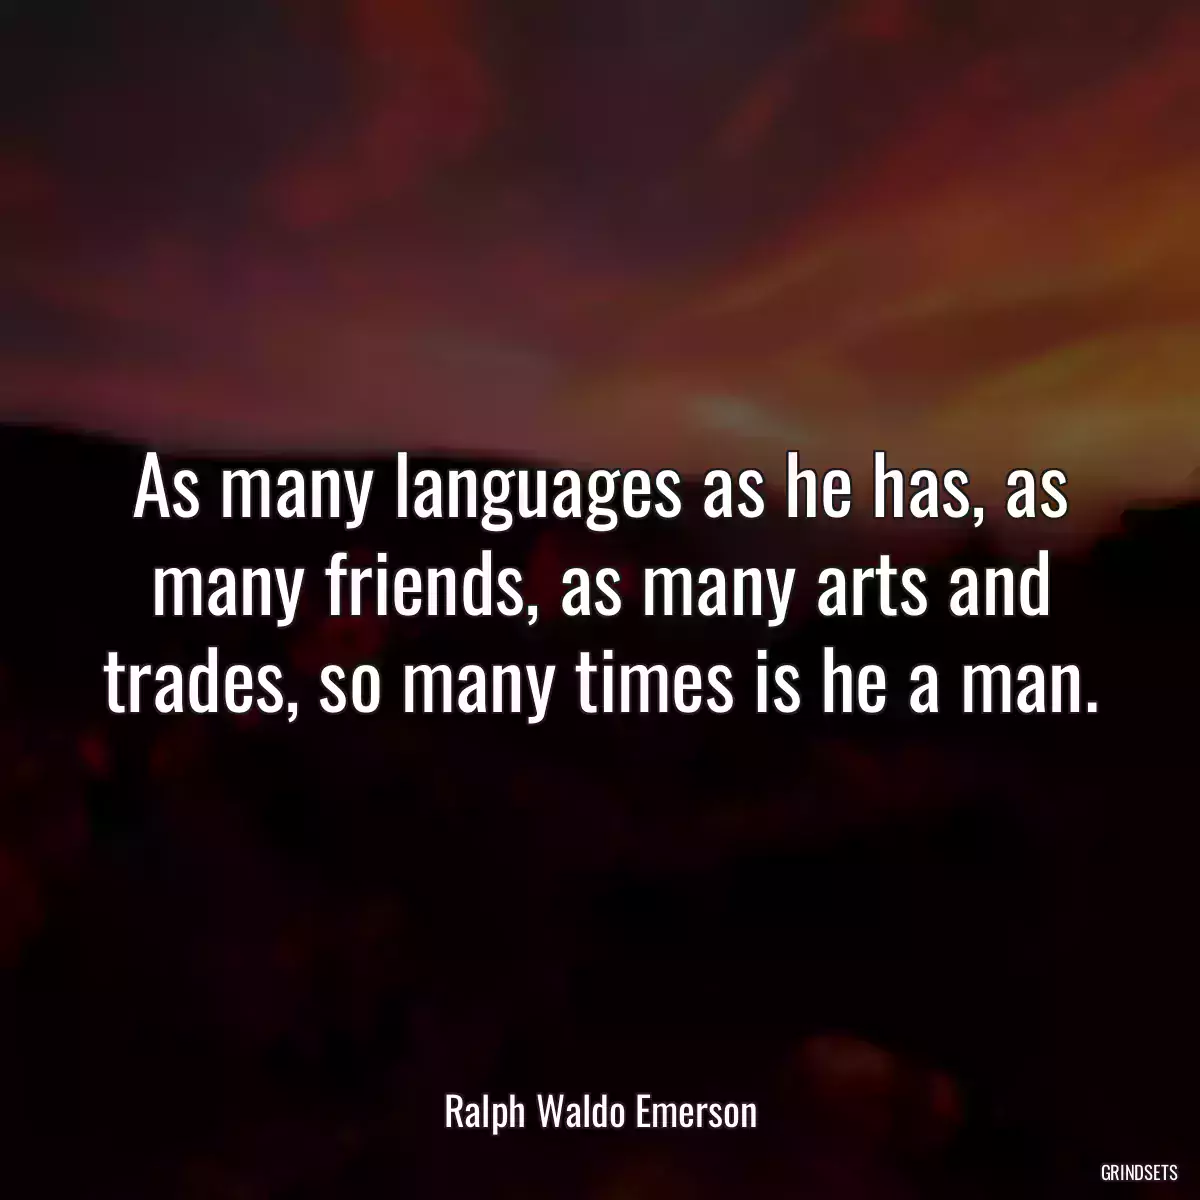 As many languages as he has, as many friends, as many arts and trades, so many times is he a man.